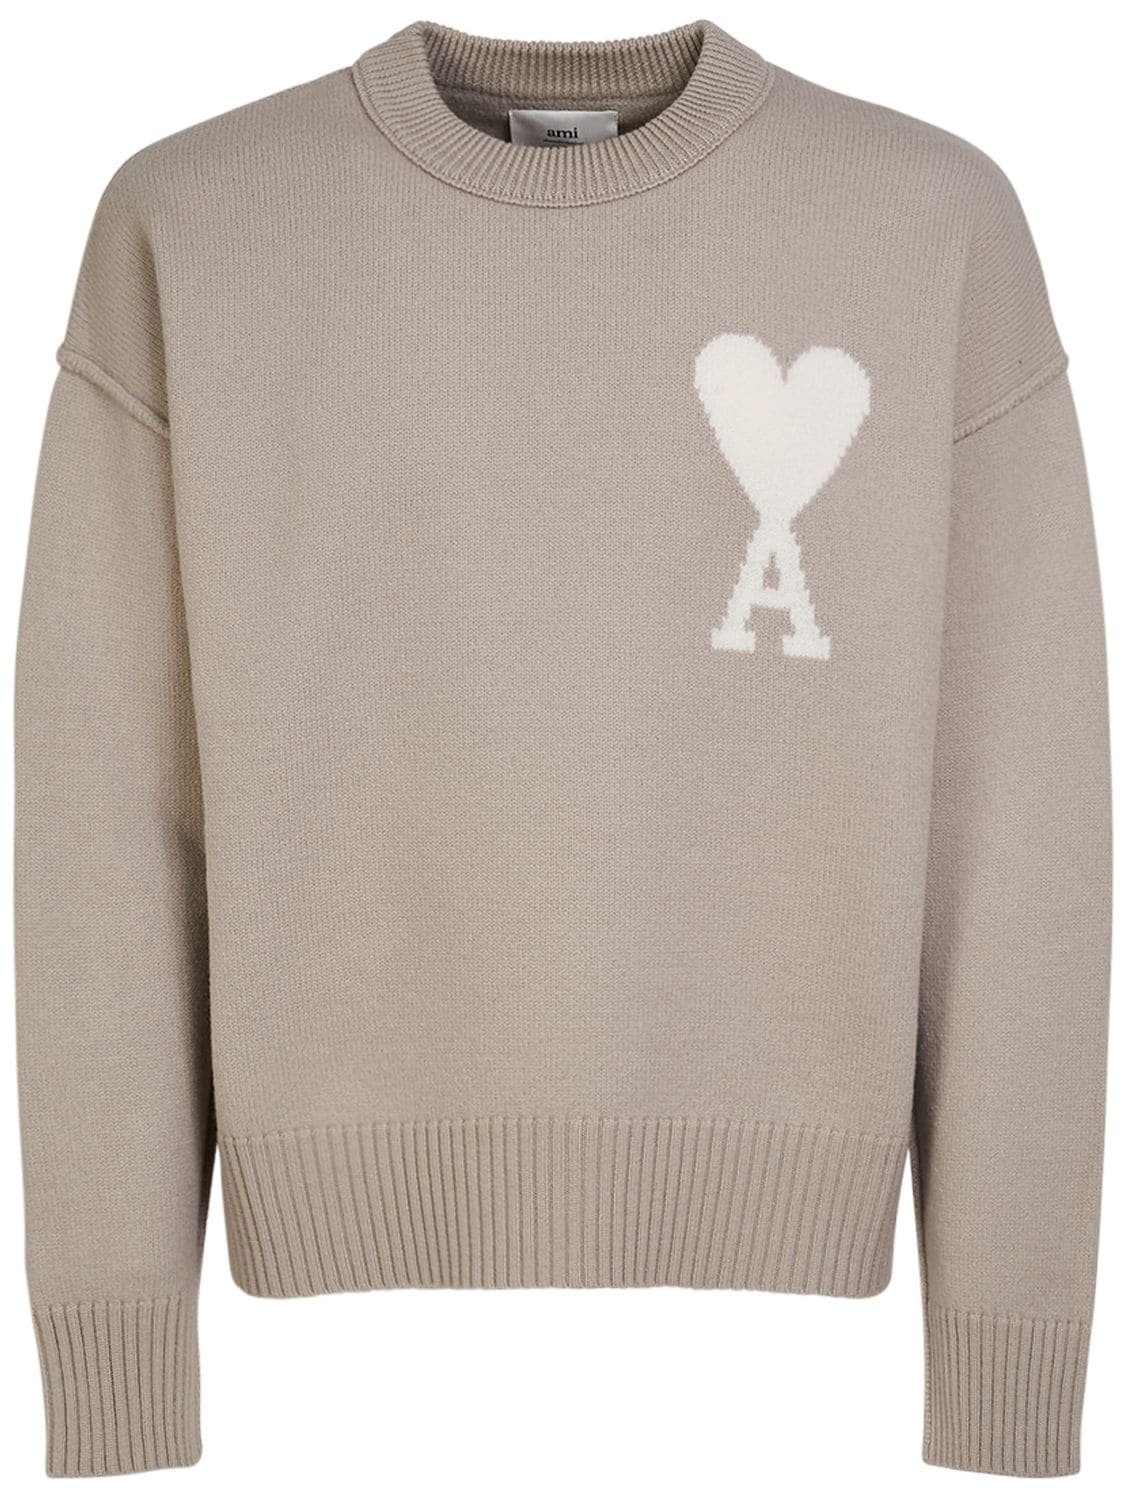 Ami Alexandre Mattiussi Adc Felted Wool Knit Sweater In Light Beige